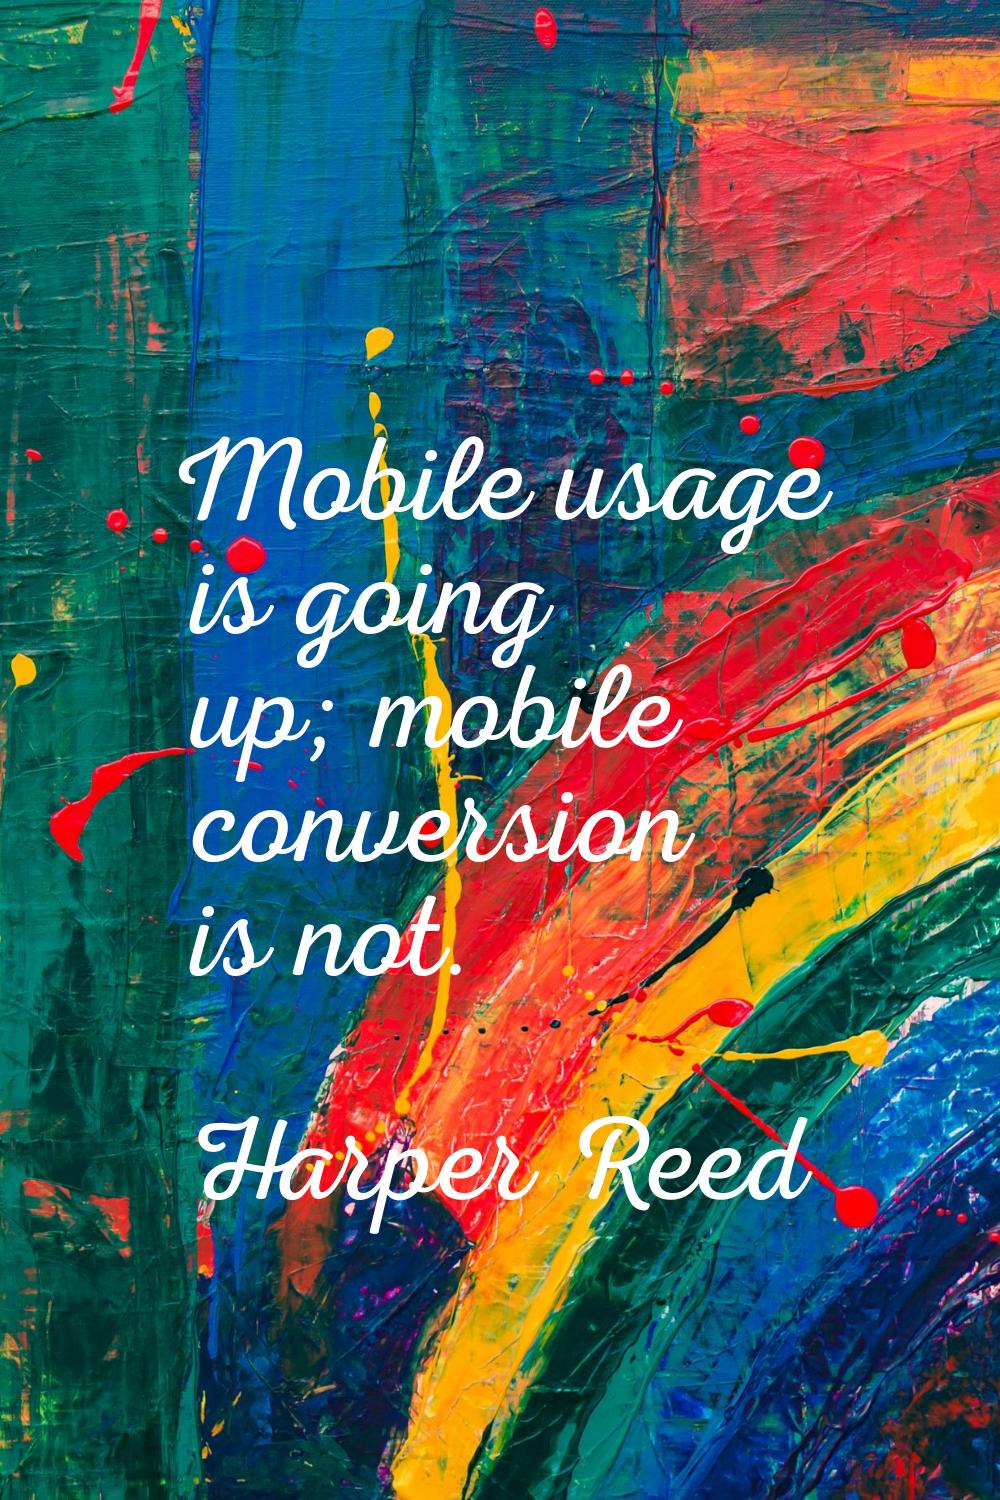 Mobile usage is going up; mobile conversion is not.